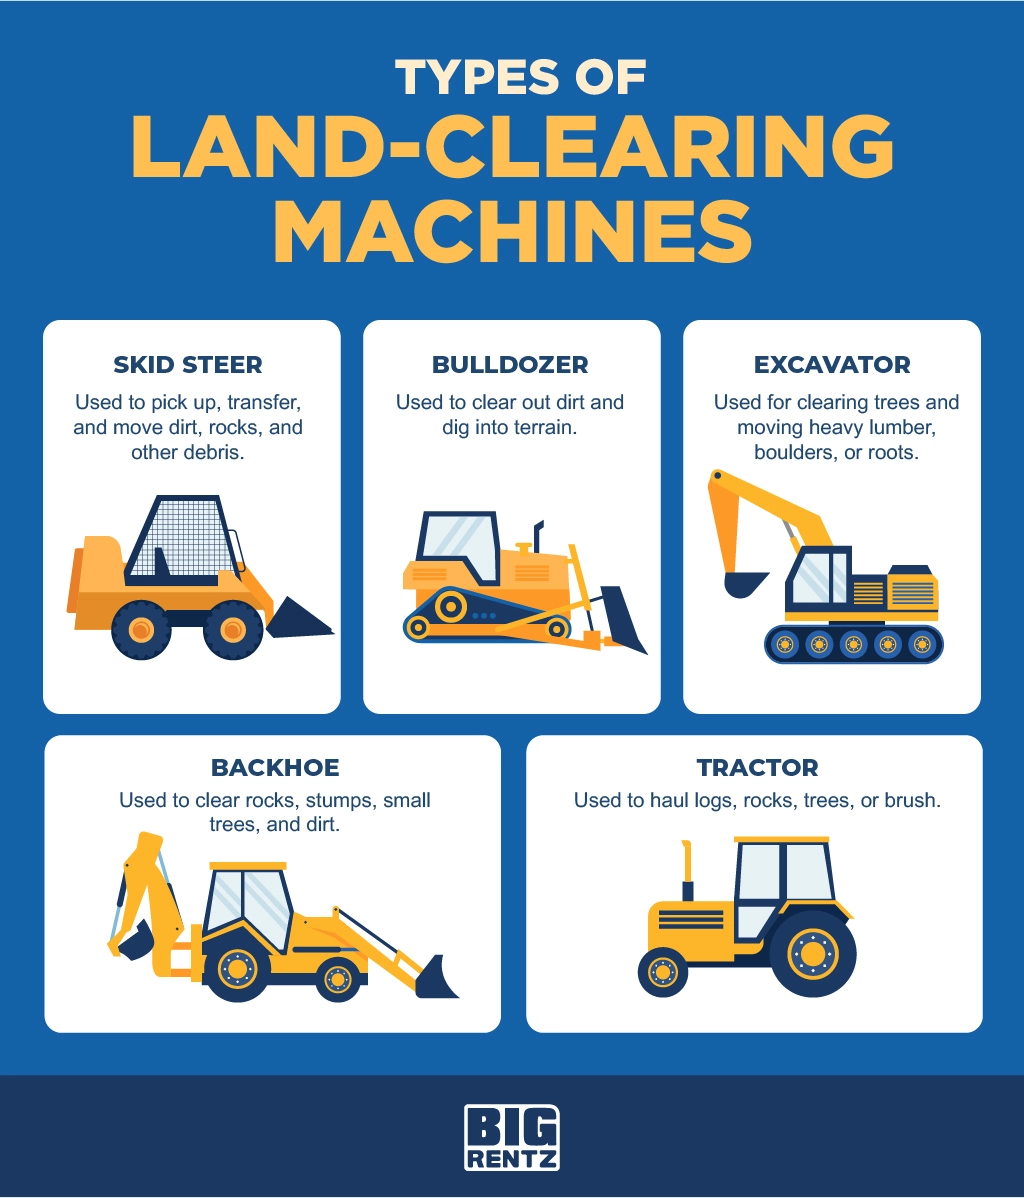 Manual Land Clearing vs. Machinery: The Human Touch 2